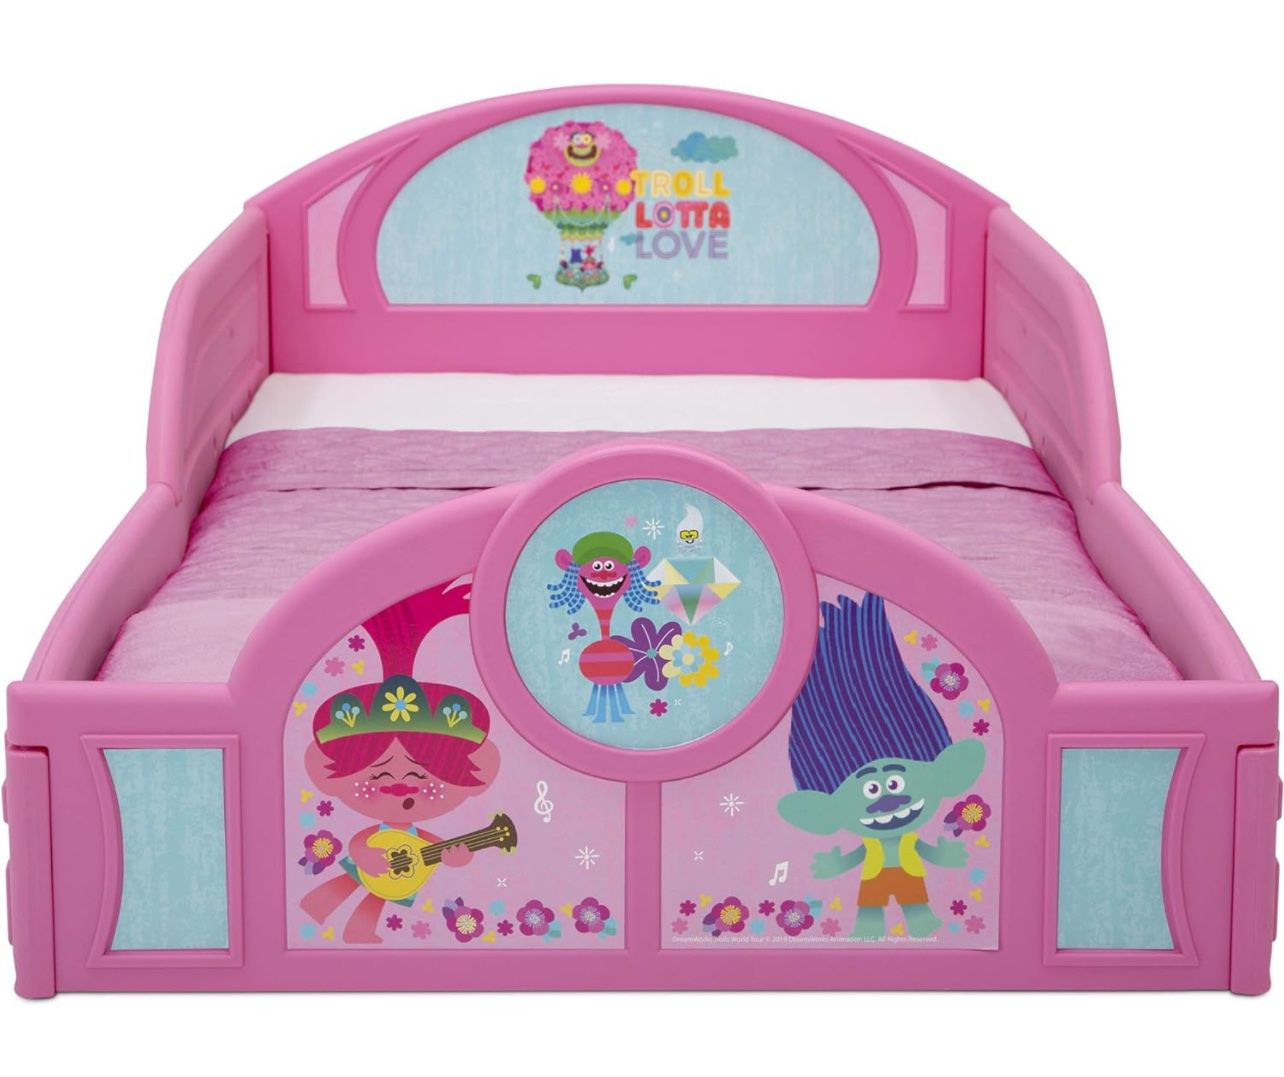 New! Trolls- Toddler Bed- Mattress Not Included 